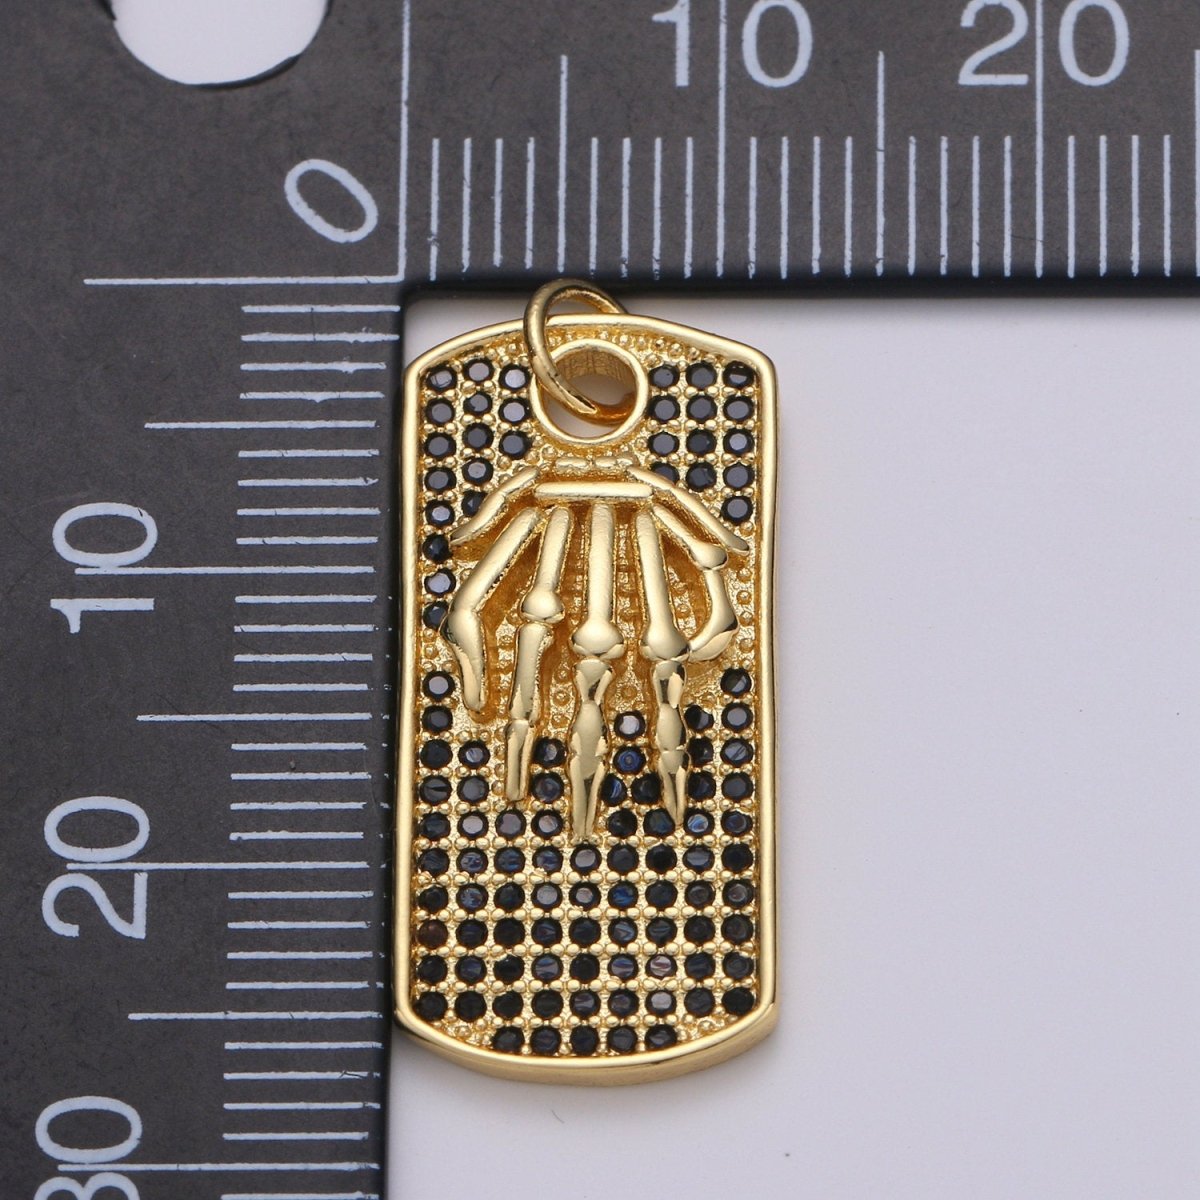 Gold Tag Skeleton Charm Gold Filled Medallion, Skull Bone Pendant Necklace Charm for Halloween Men Gothic Inspired Necklace Supply, D-134 D-135 - DLUXCA